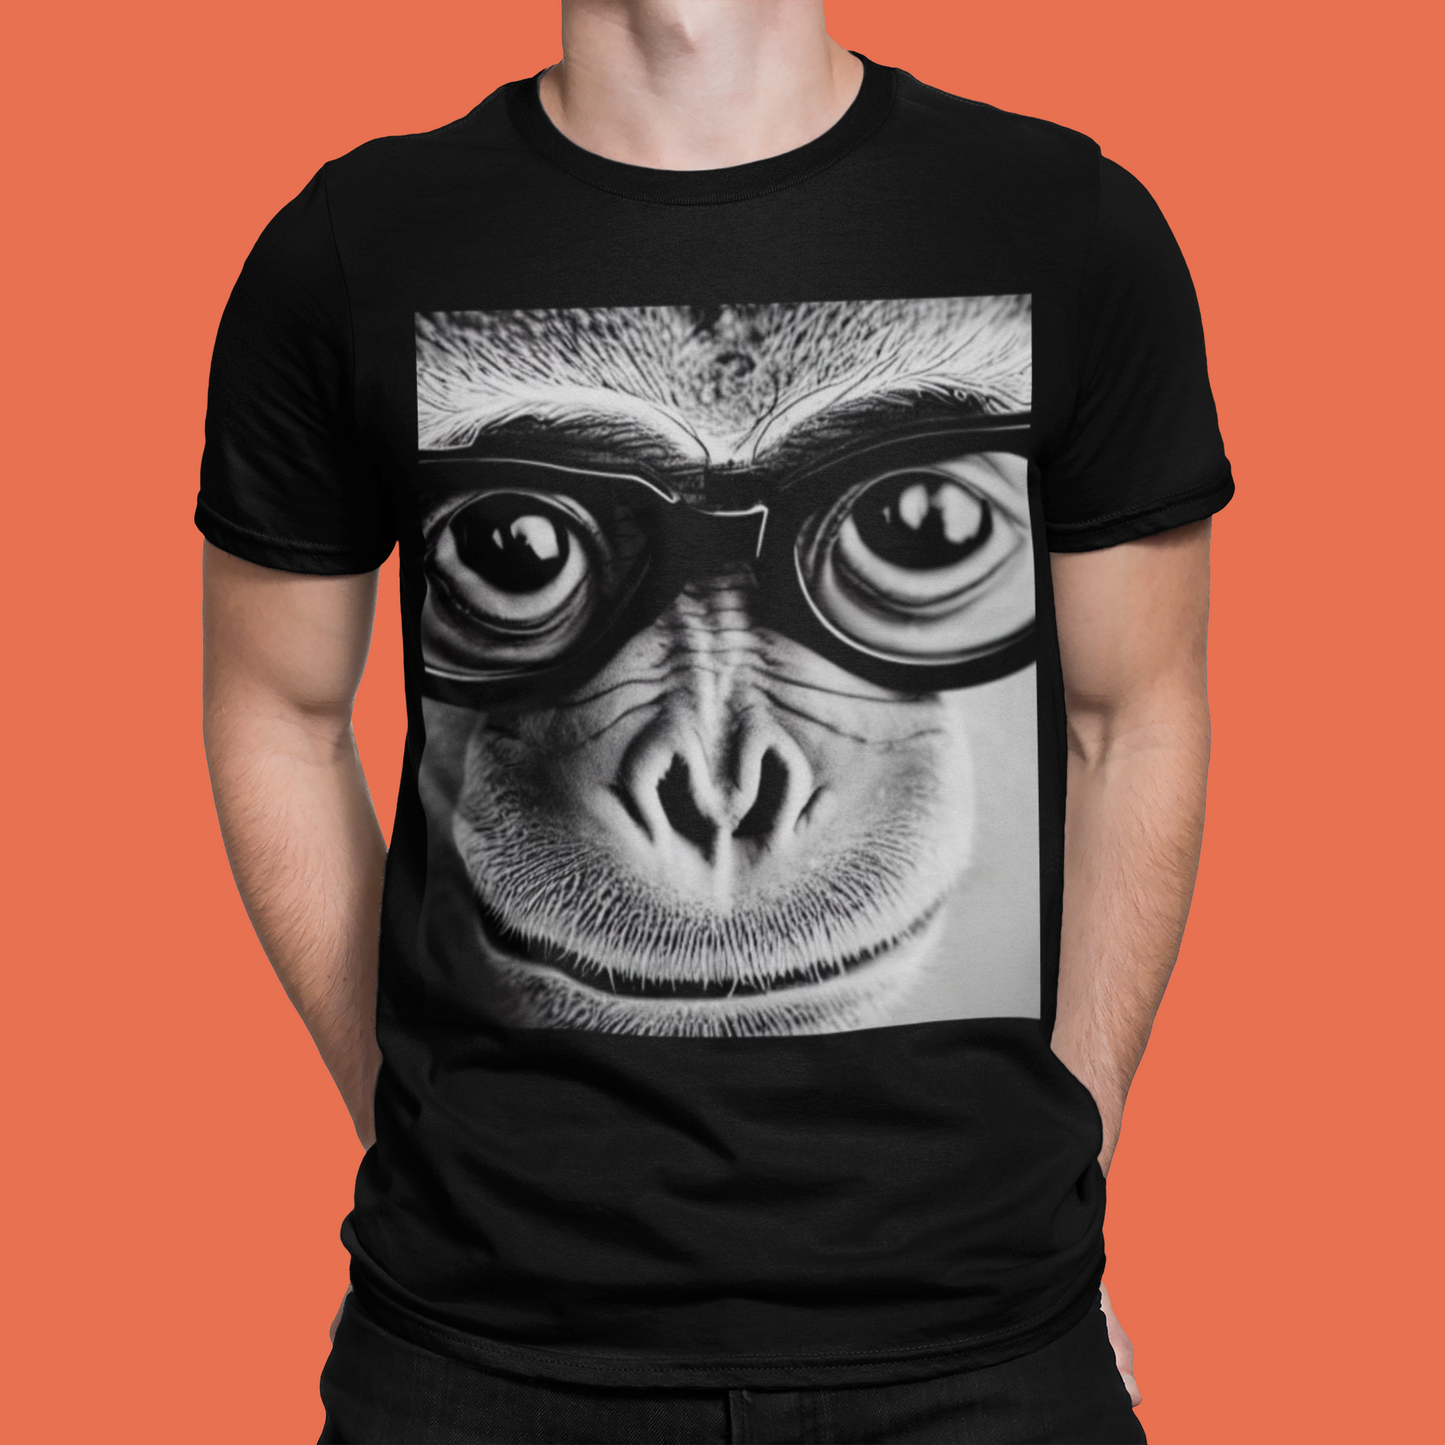 Monkey Life T-Shirt │Made in USA │Unisex - Men and Women's Cotton Tee │Monkey Wearing Glasses